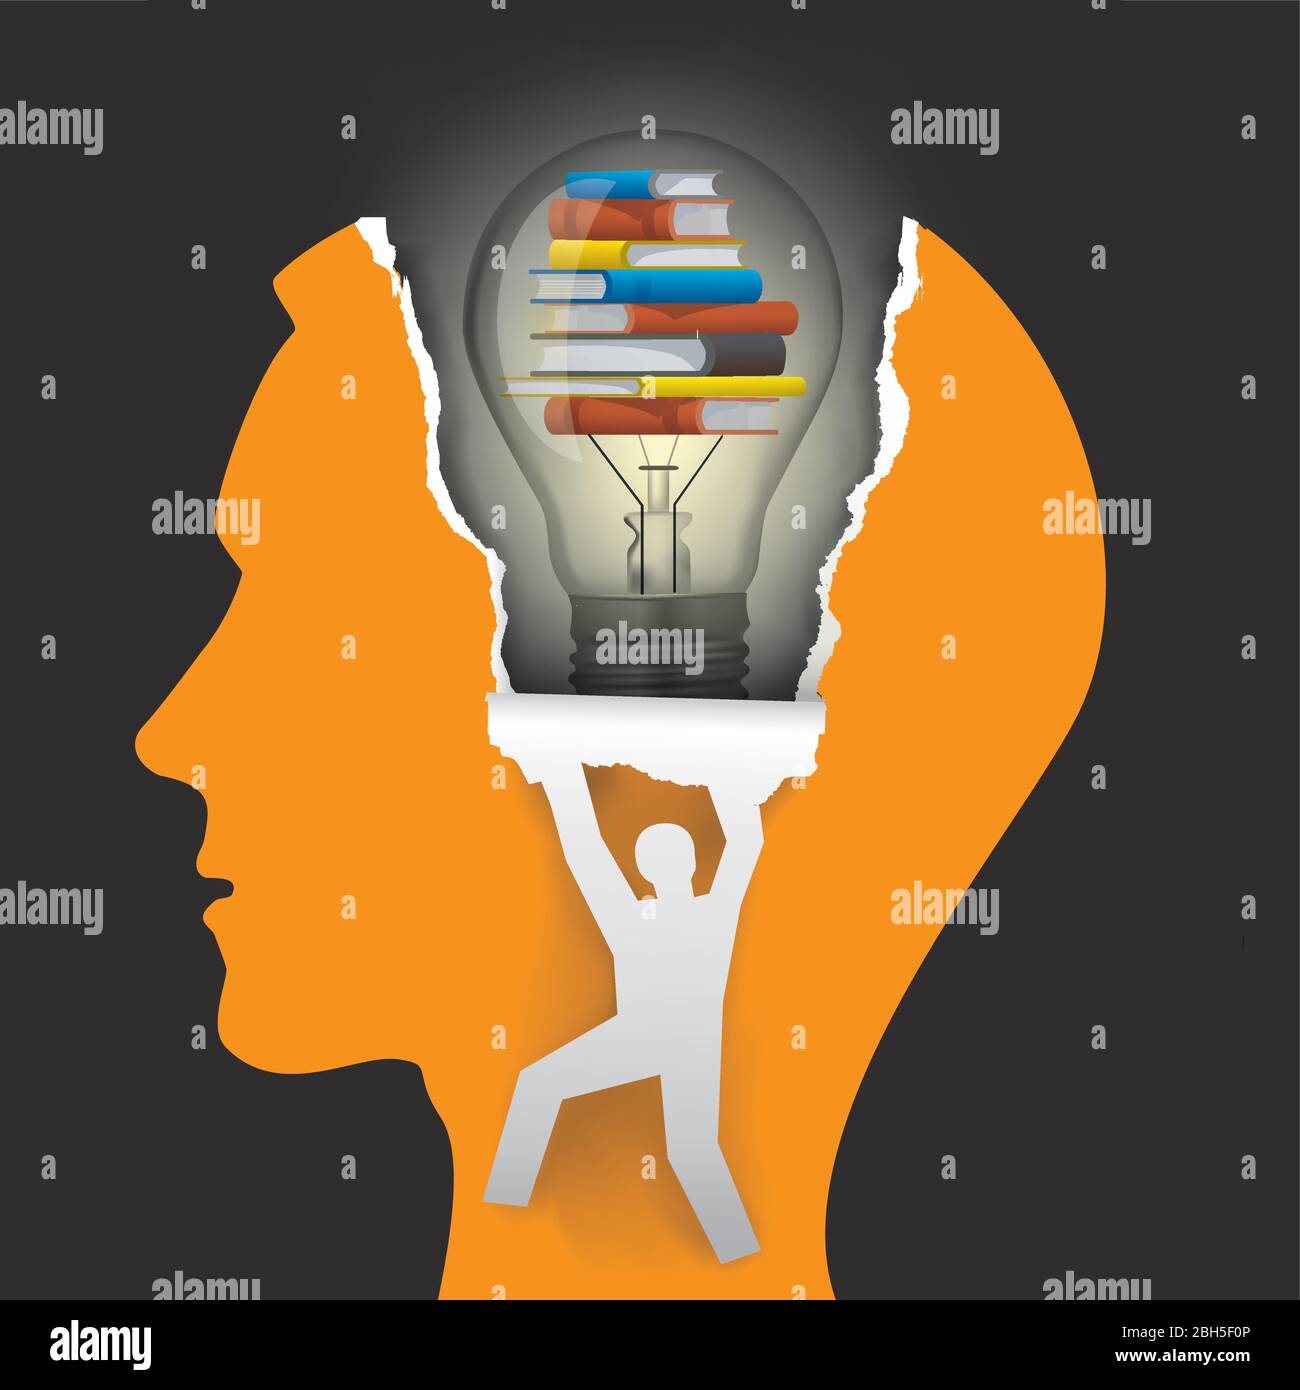 Student, knowledge and creativity, education concept. Male head in profile male silhouette ripping paper with light bulb and books. Vector available. Stock Vector